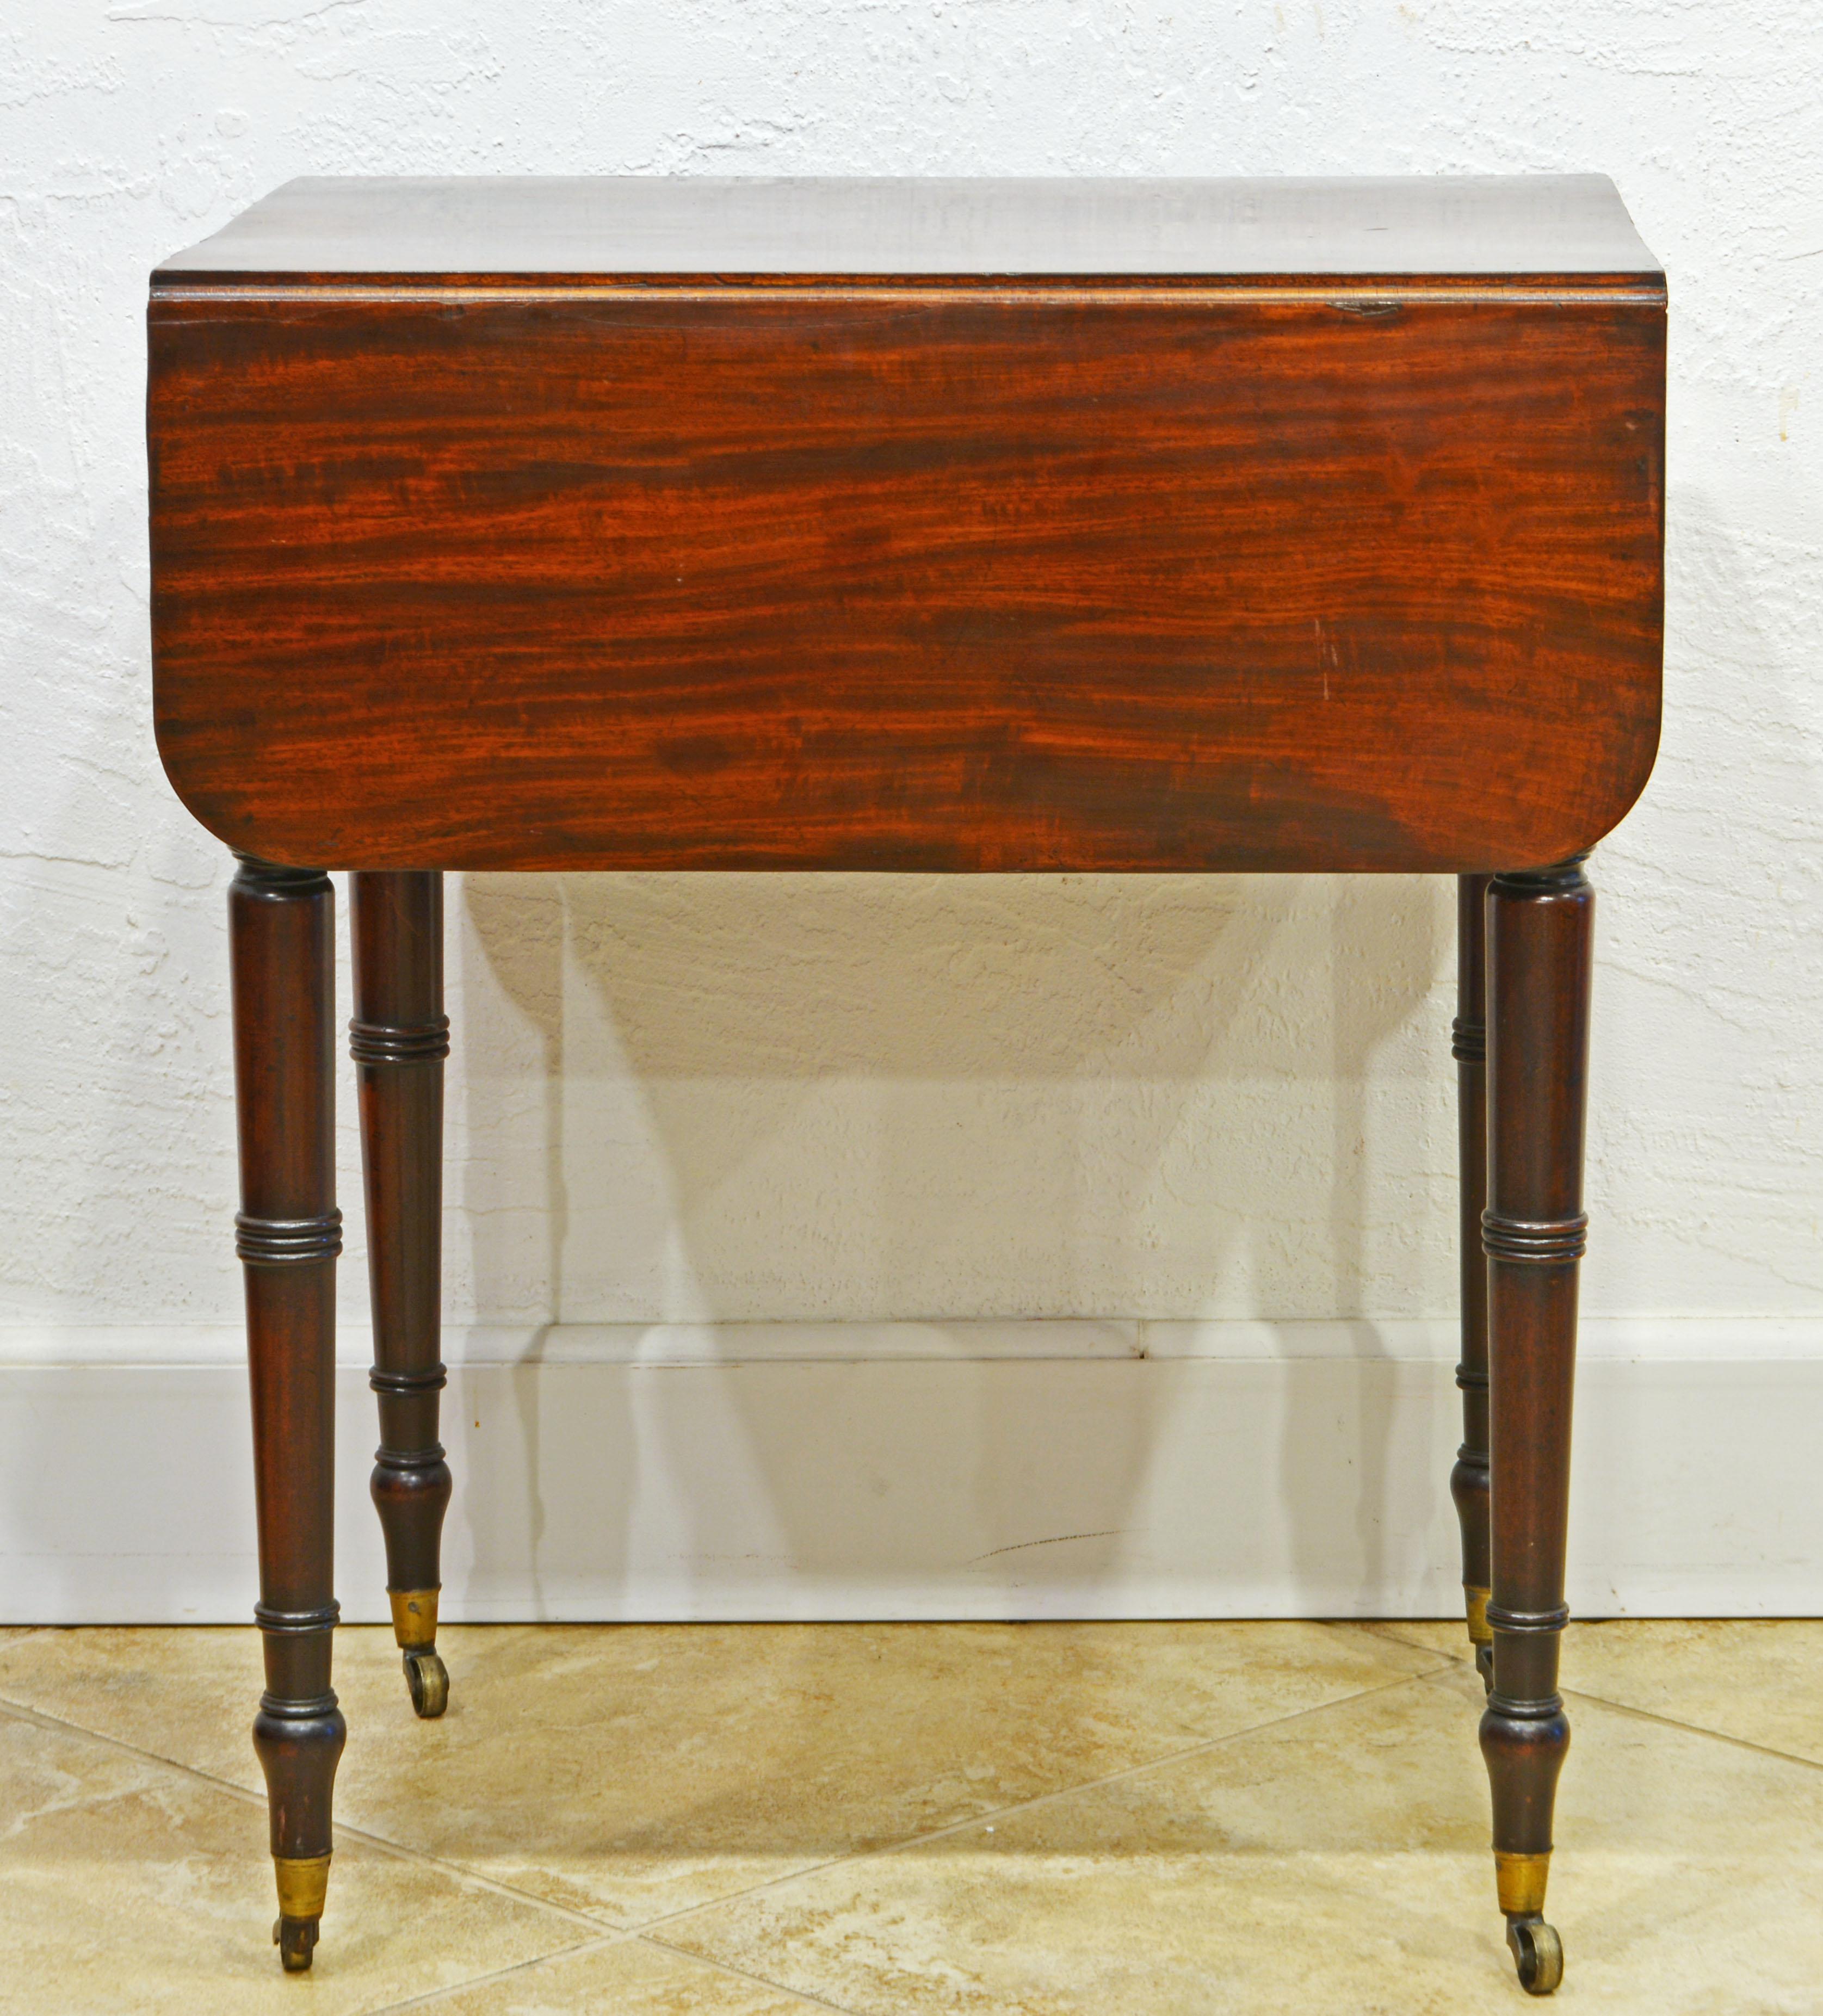 This attractive size English mahogany pembroke table feature a polished top of a deep warm color above a drawer with two turned pulls complimented by a similar simulated on the other side.resting on four round beautifully turned legs ending in